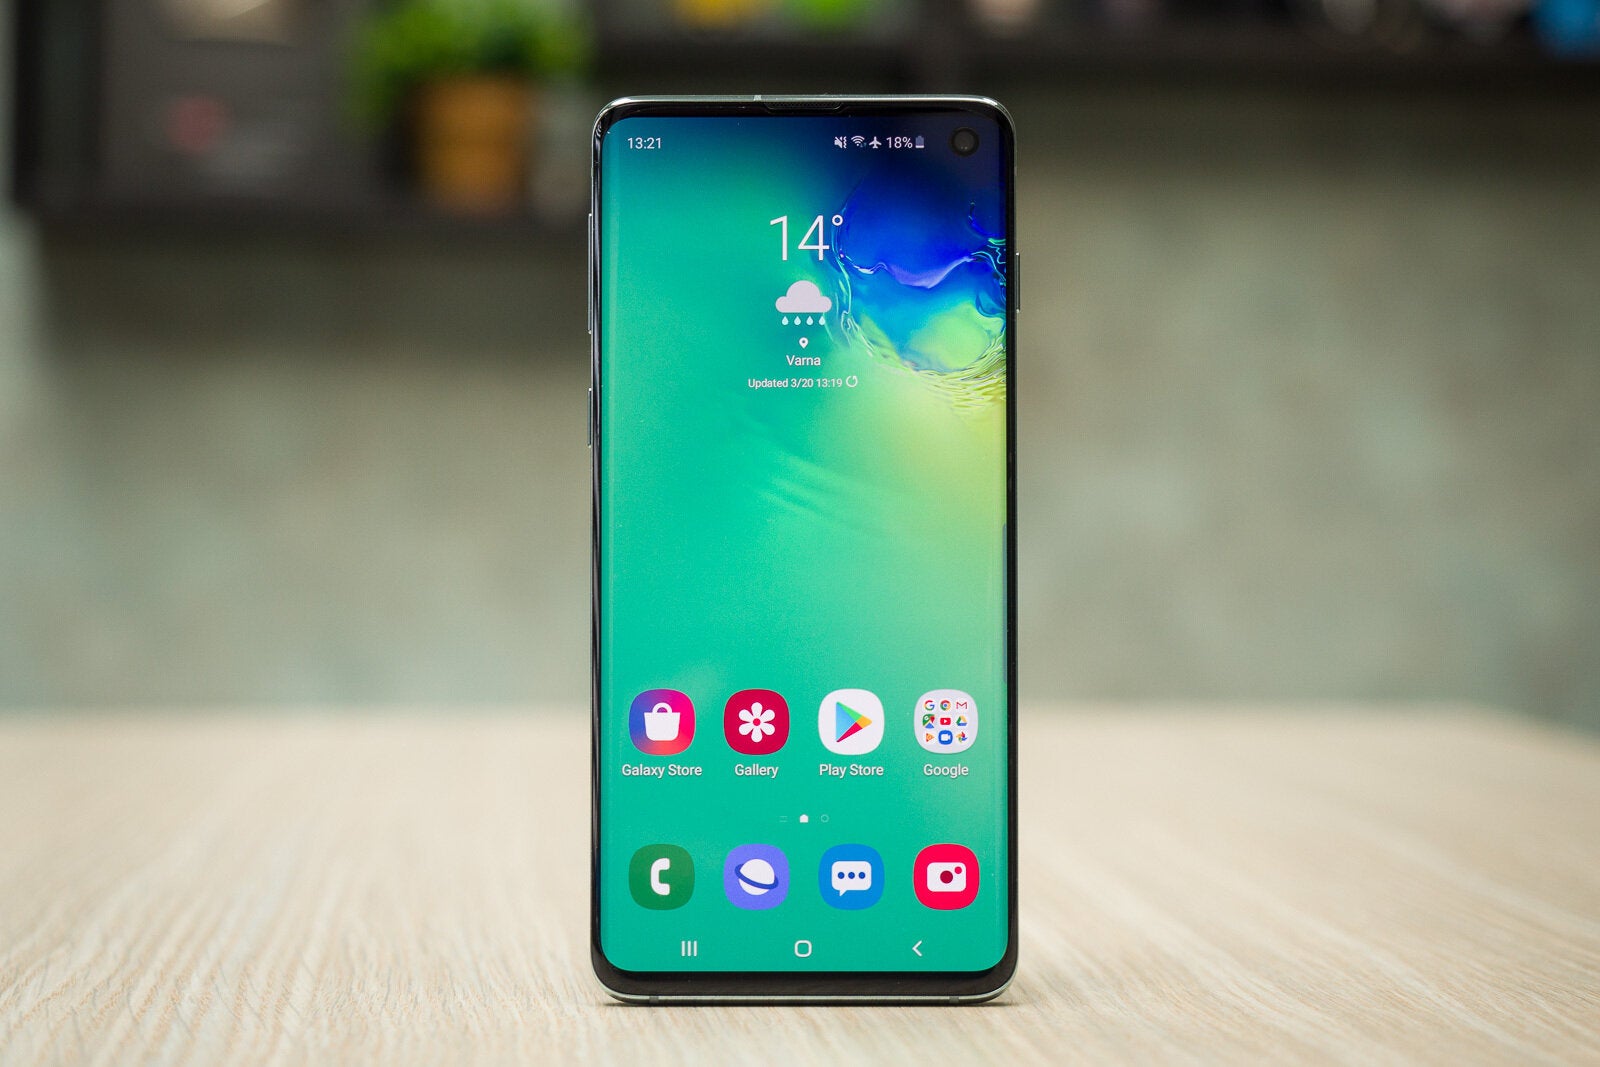 Moto G6 Android 9.0 Pie update locks users out of their phones, here is how to fix it